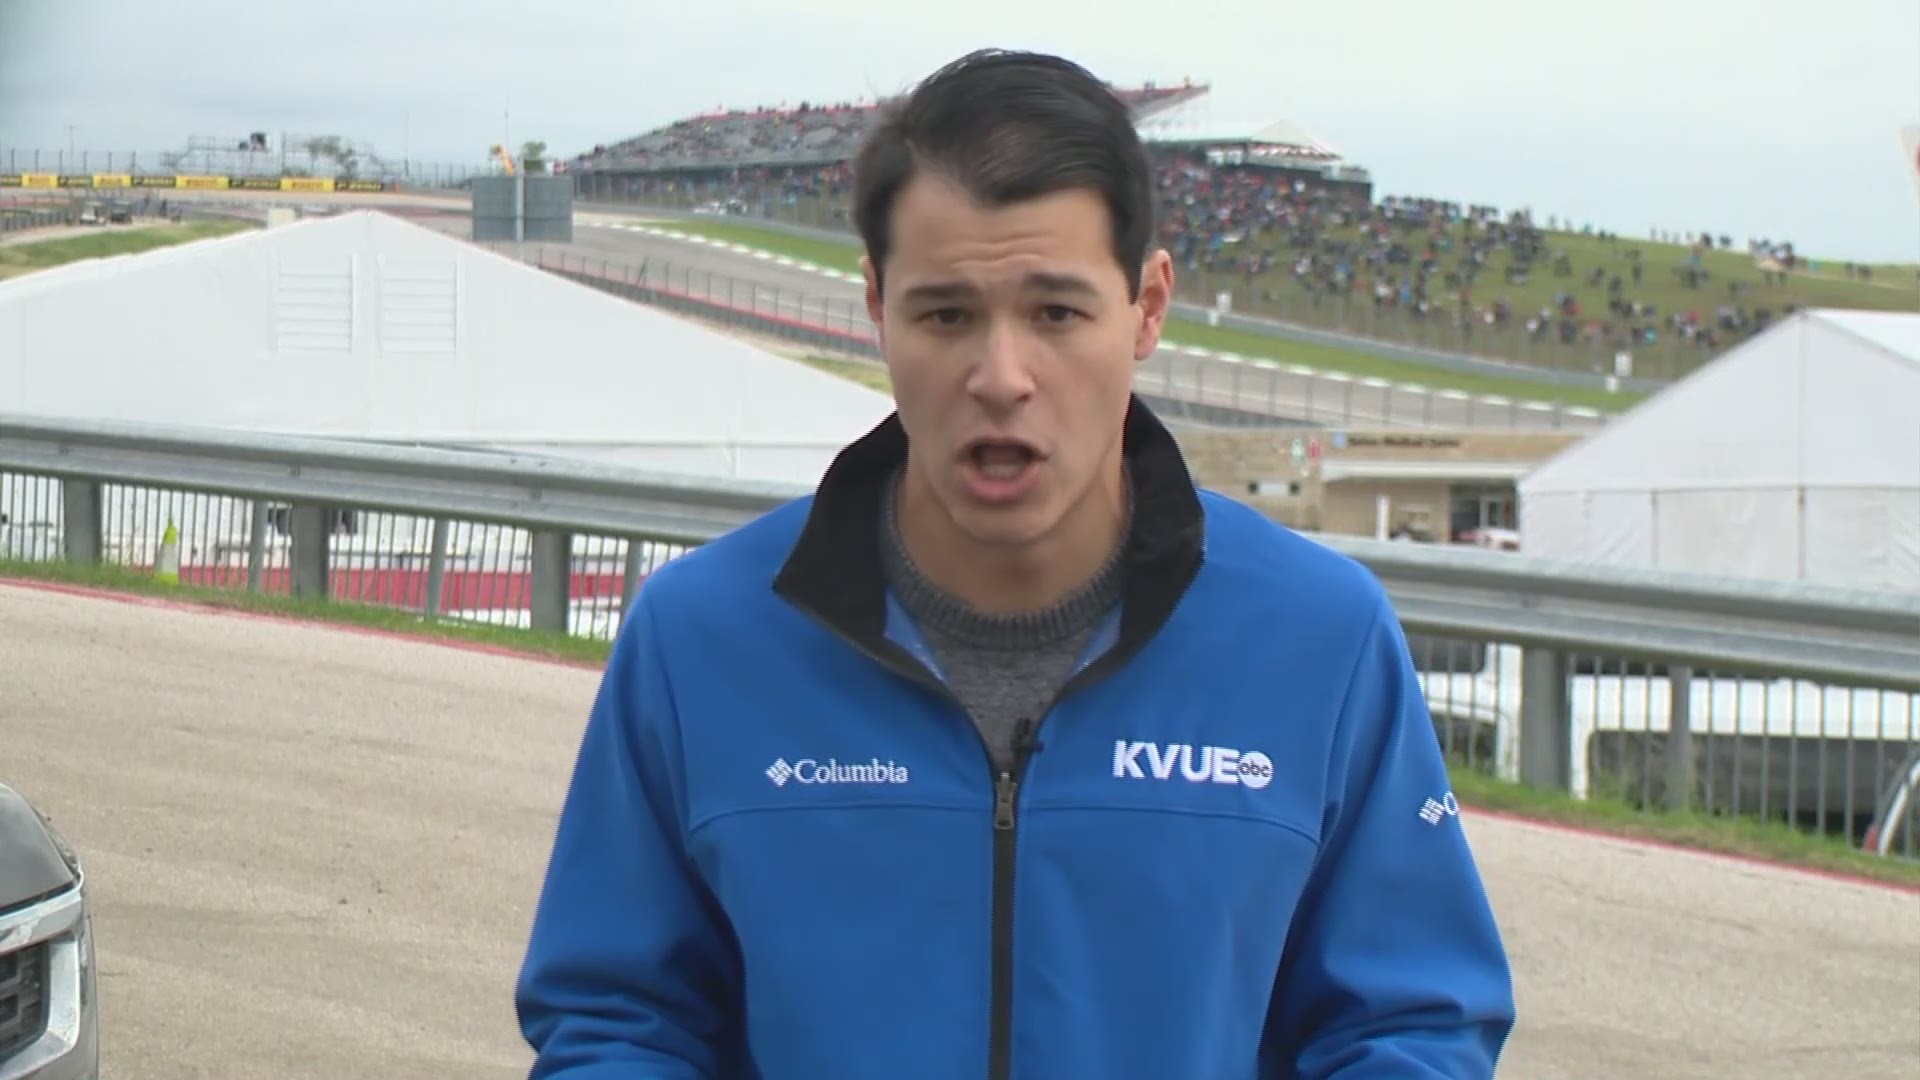 Day two of F1 is in the books. There was speculation that rain was going to impact the racing, but KVUE's Luis de Leon shows us fans were prepared for anything.